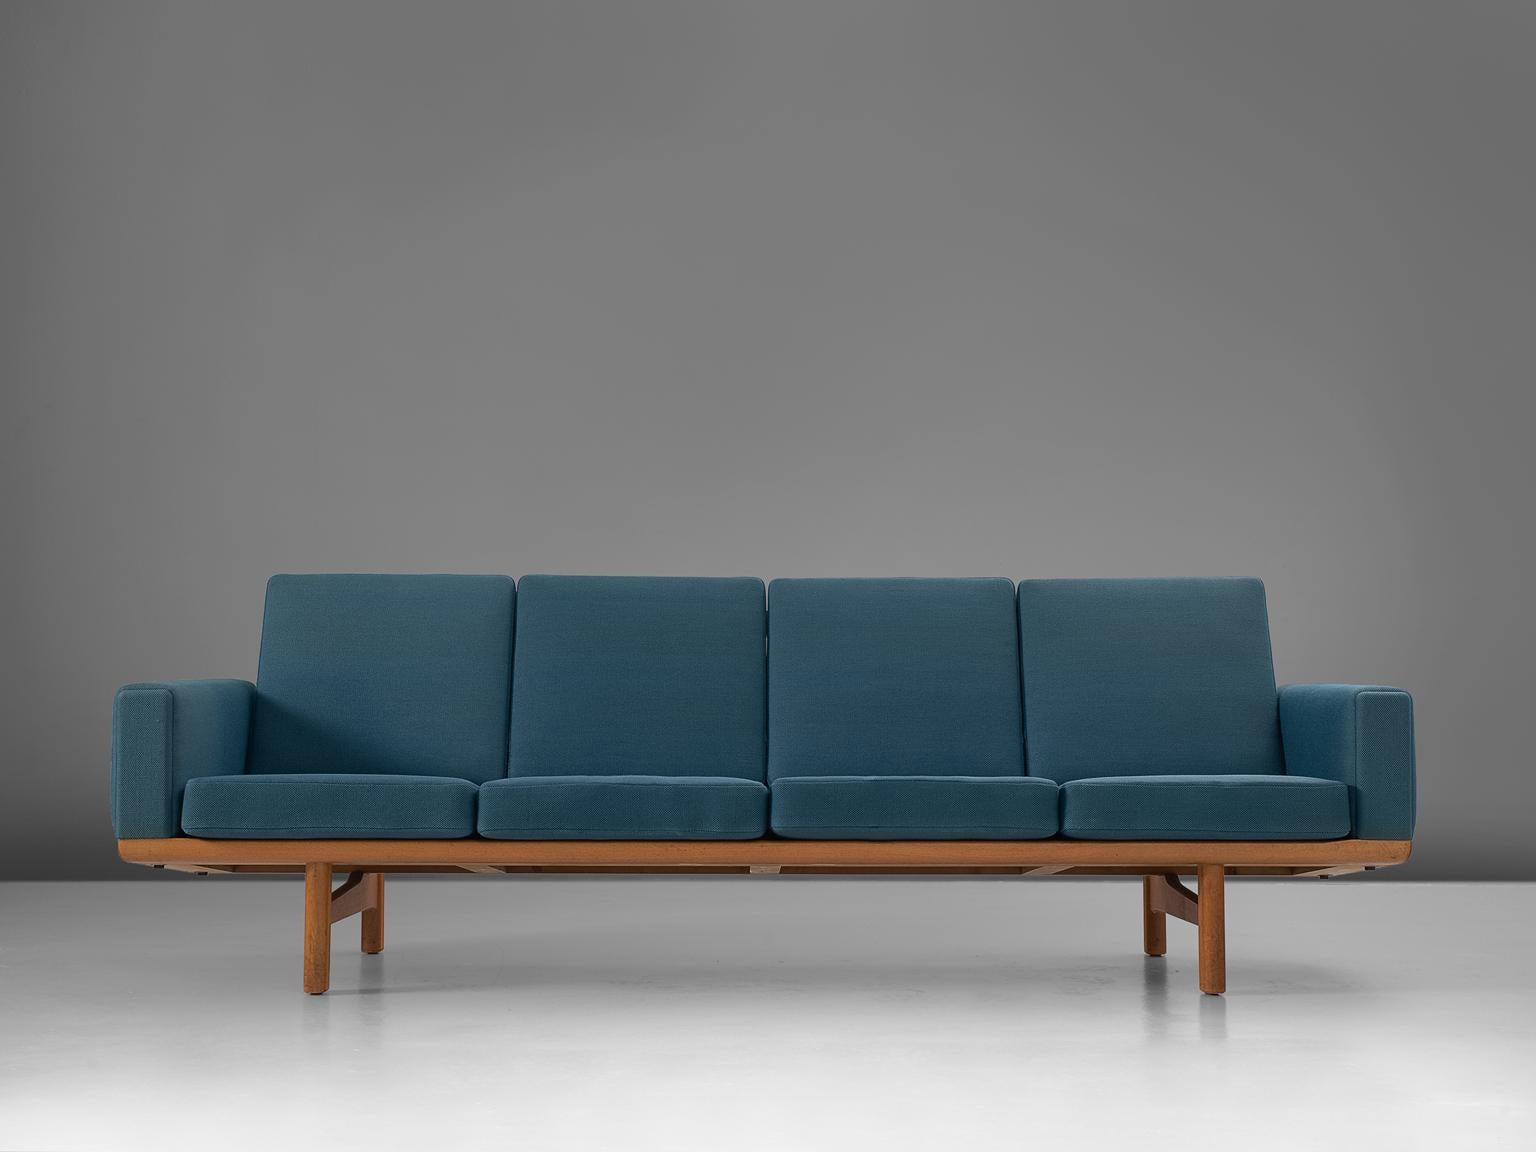 Sofa GE236/4, in oak and fabric, by Hans Wegner for GETAMA, Denmark, 1950s. 

Sofa designed by Hans Wegner for GETAMA. This sofa has a solid oak frame with real nice construction details. Due to the high legs and the low but detailed back, this